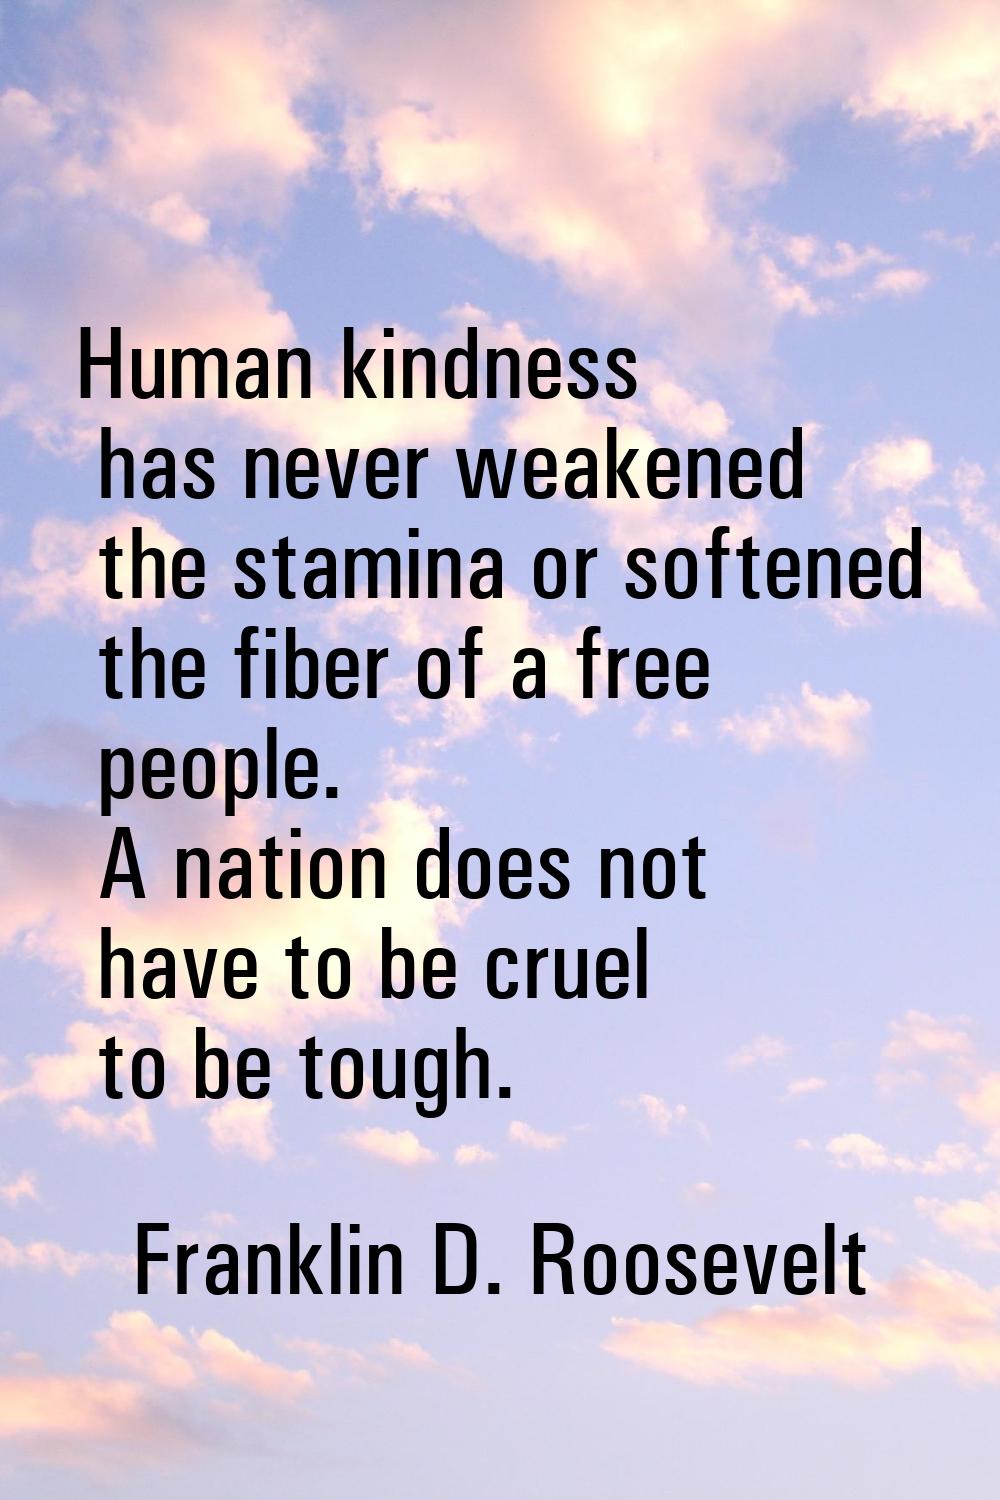 Human kindness has never weakened the stamina or softened the fiber of a free people. A nation does